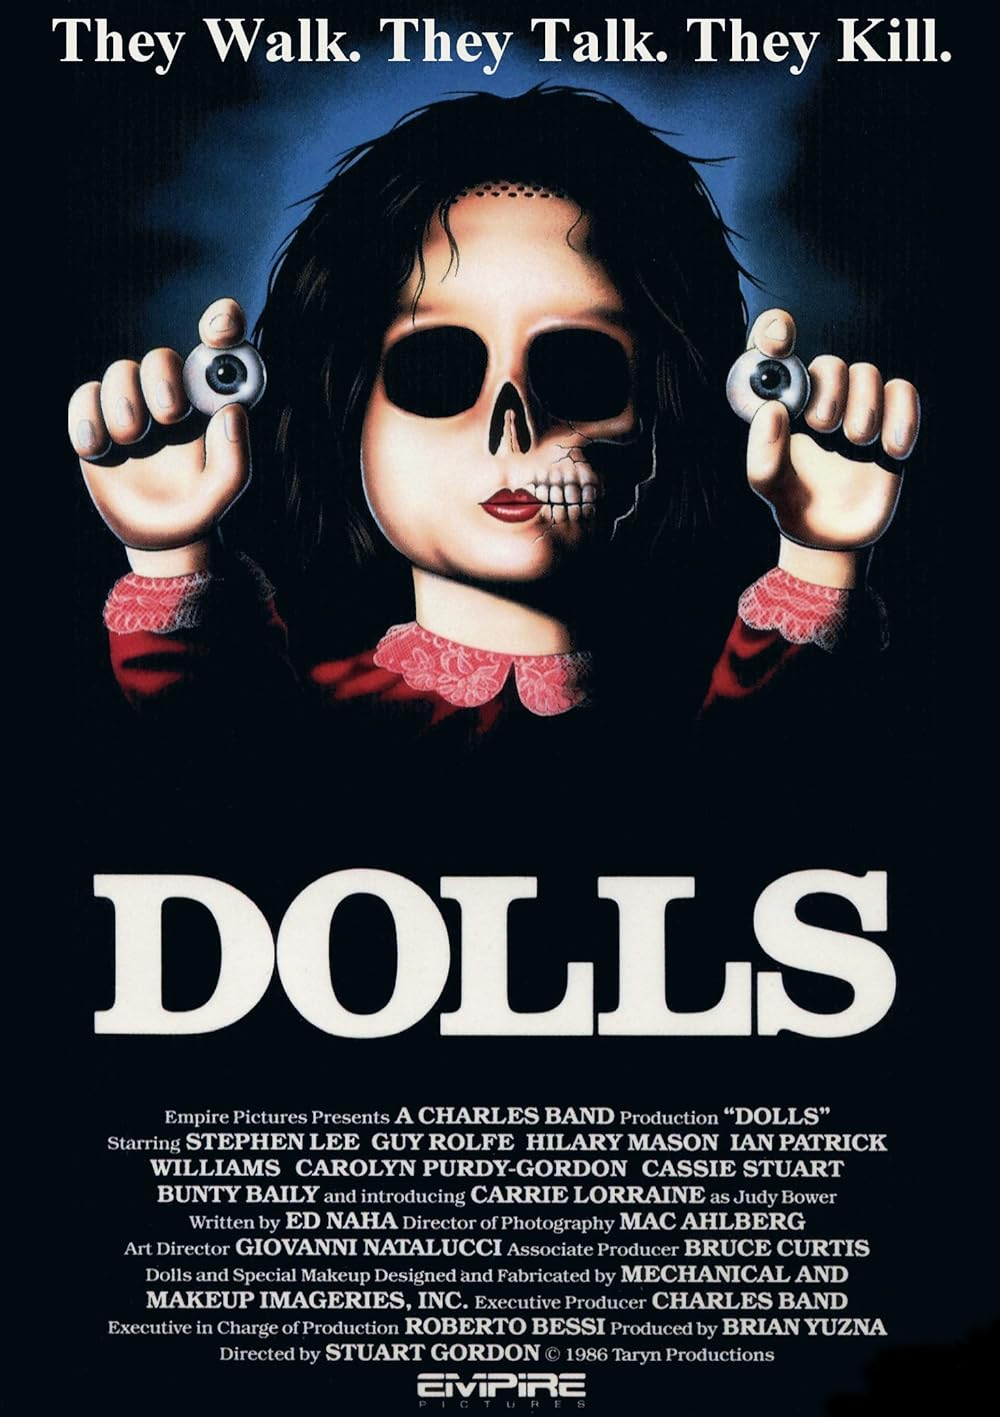 VHS COver for the movie Dolls featuring a doll with half its face exposed as a skull, holding its eyeballs in each hand